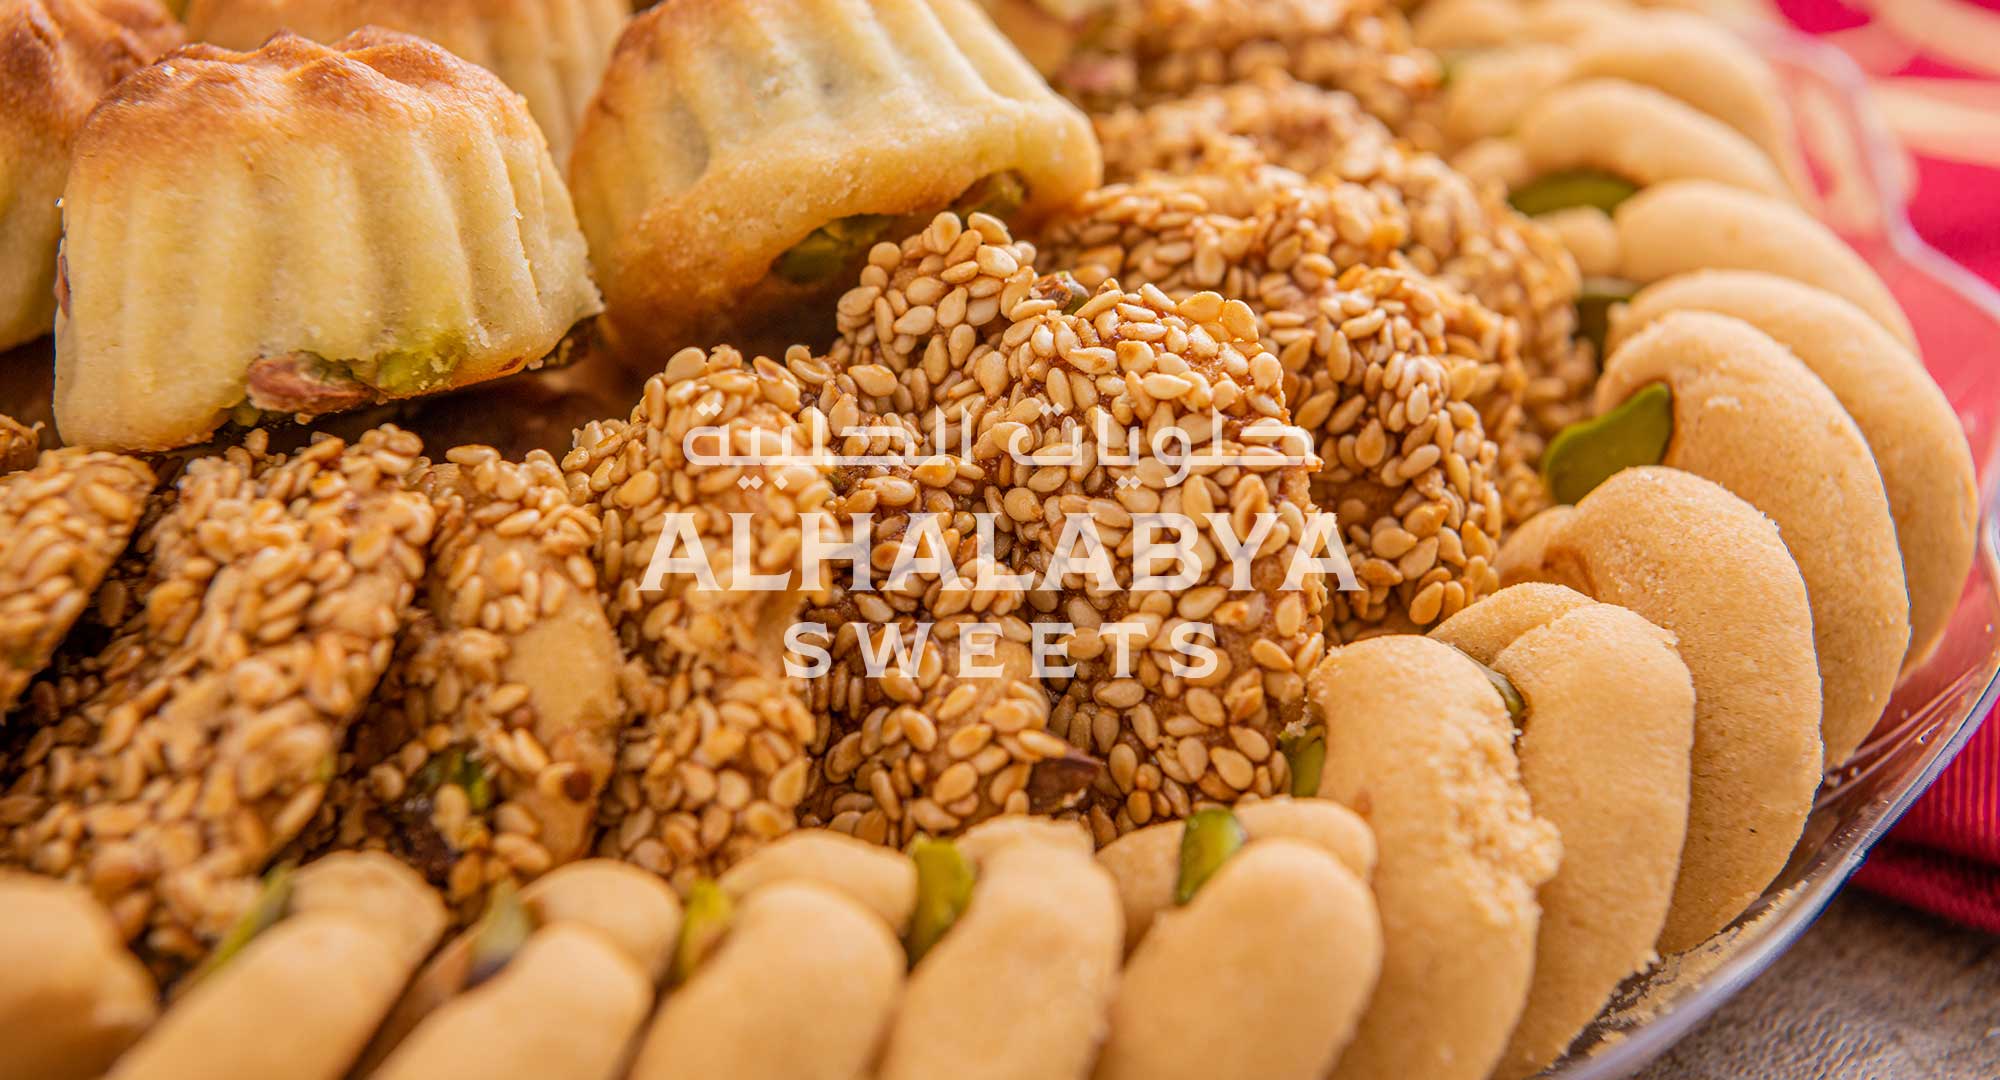 Al Halabya Sweets’ Commitment to Quality